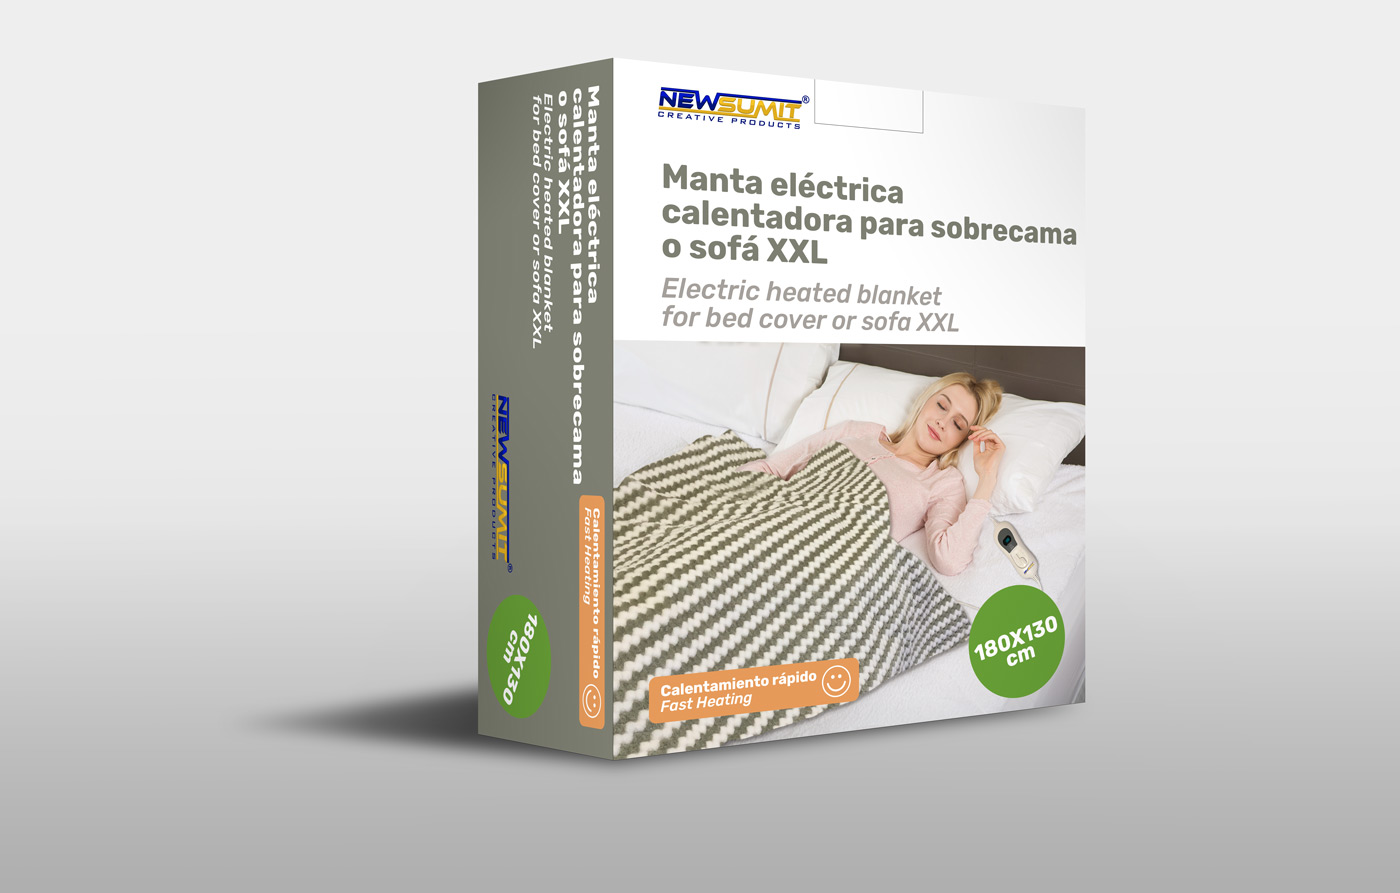 Portfolio of graphic and creative design works of boxes and packaging for electric blanket